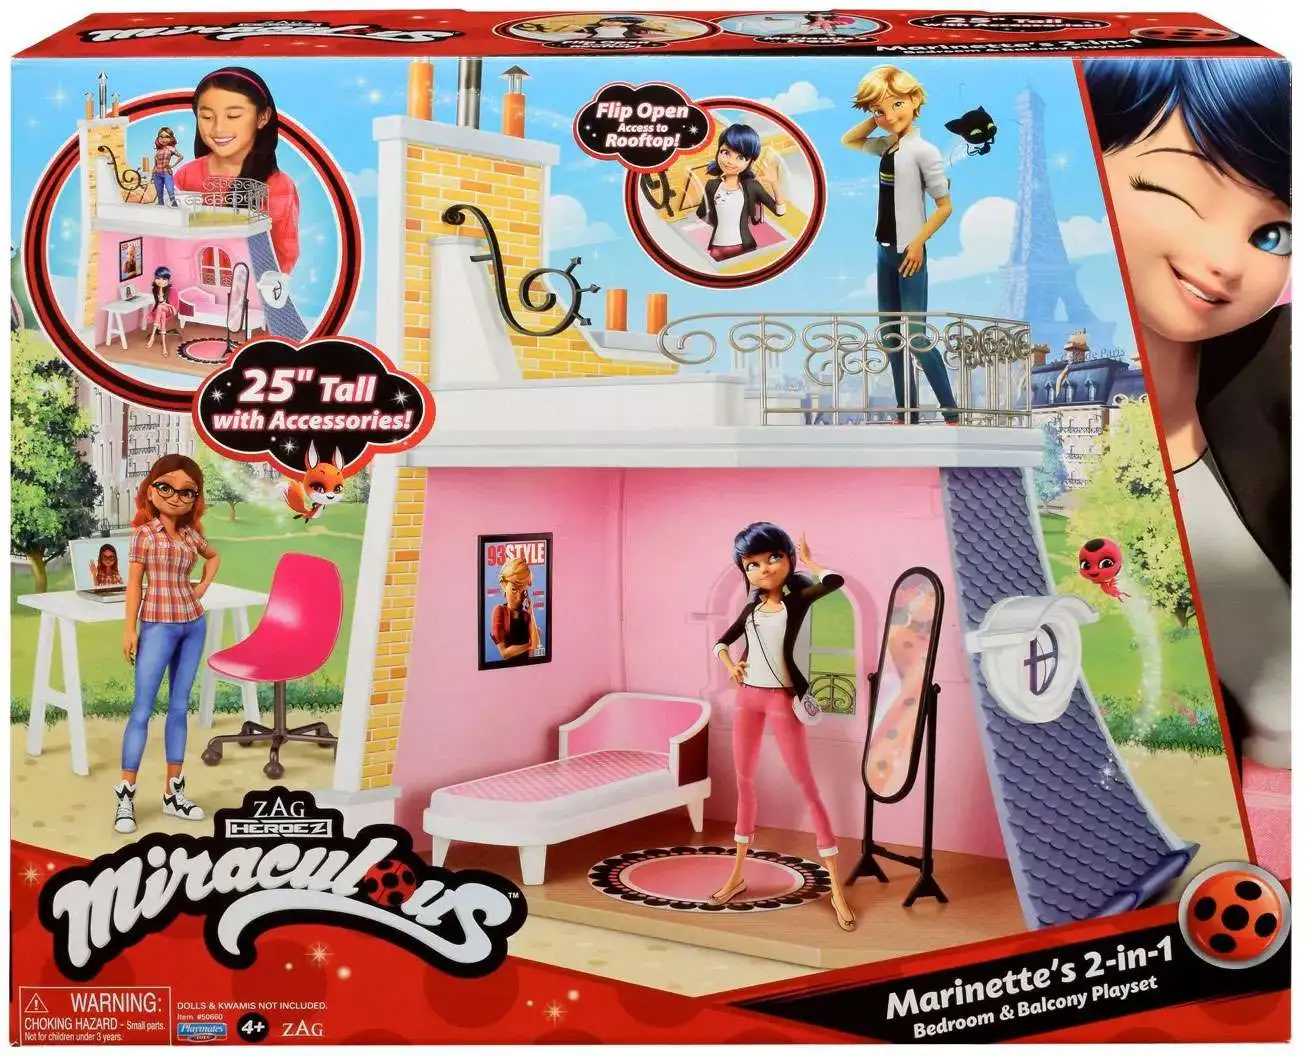 This Miraculous Ladybug figurine comes with 1 accessory. Ages 4+